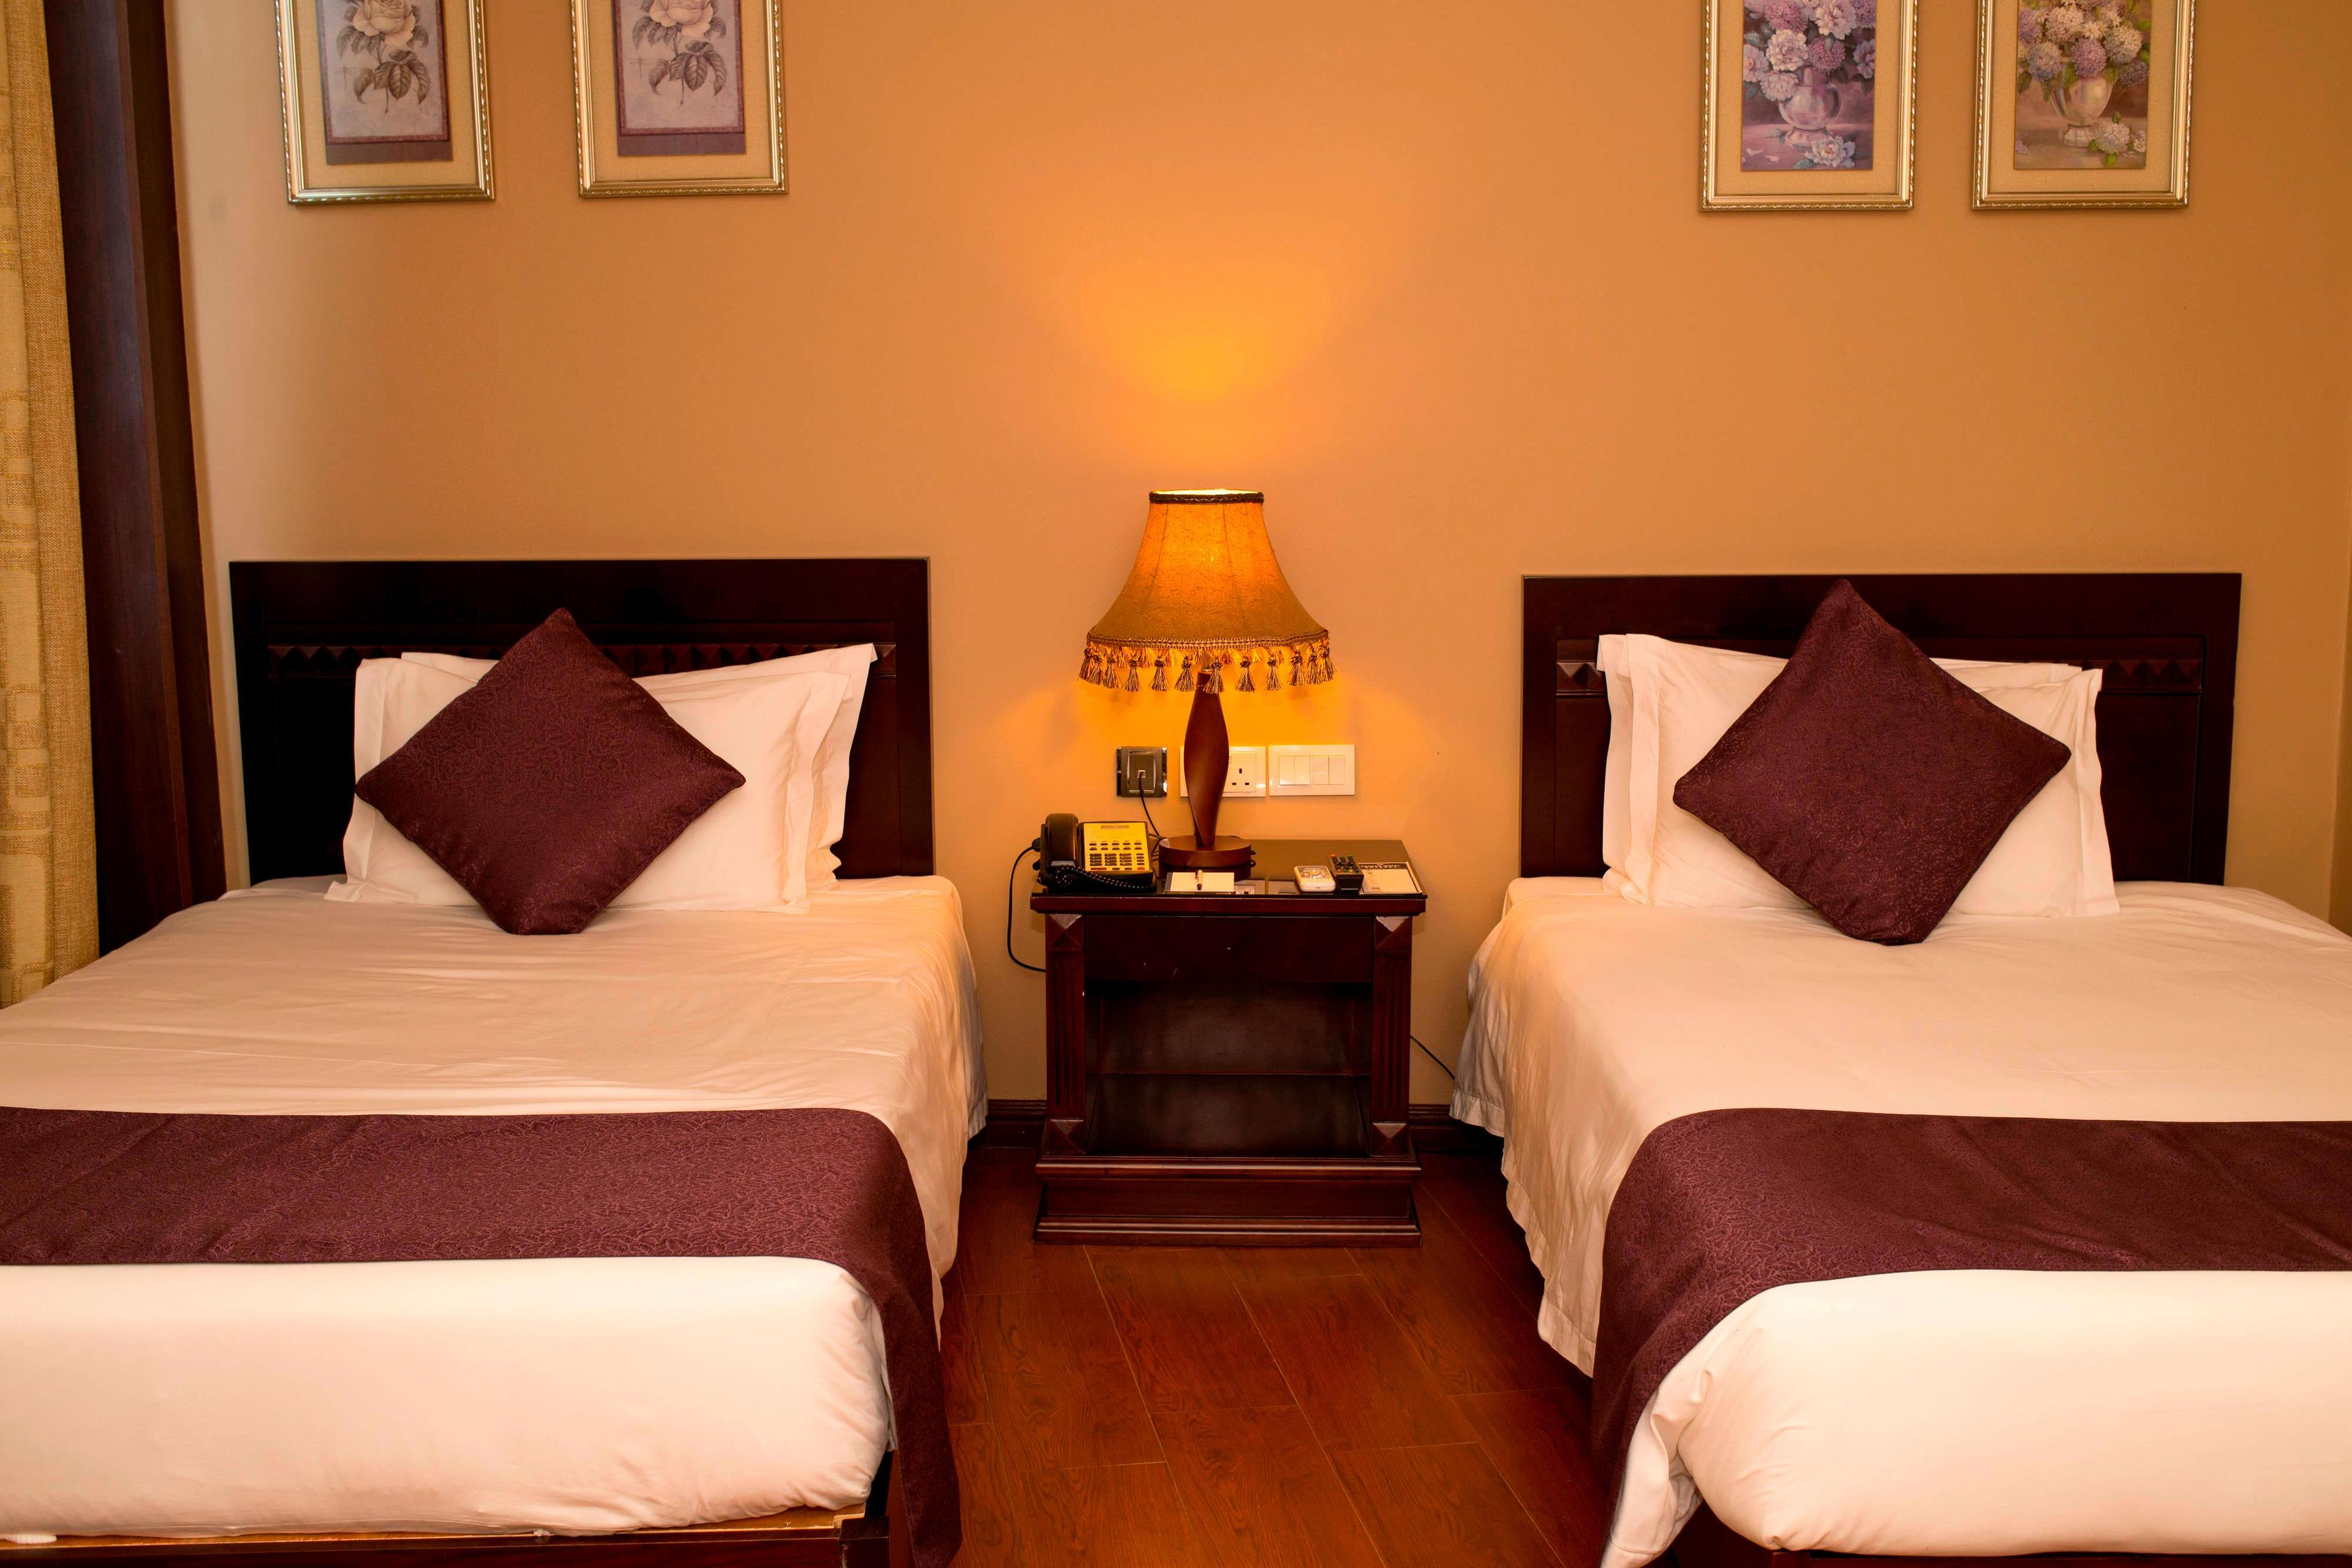 The guest rooms are offer a luxurious and spacious stay.